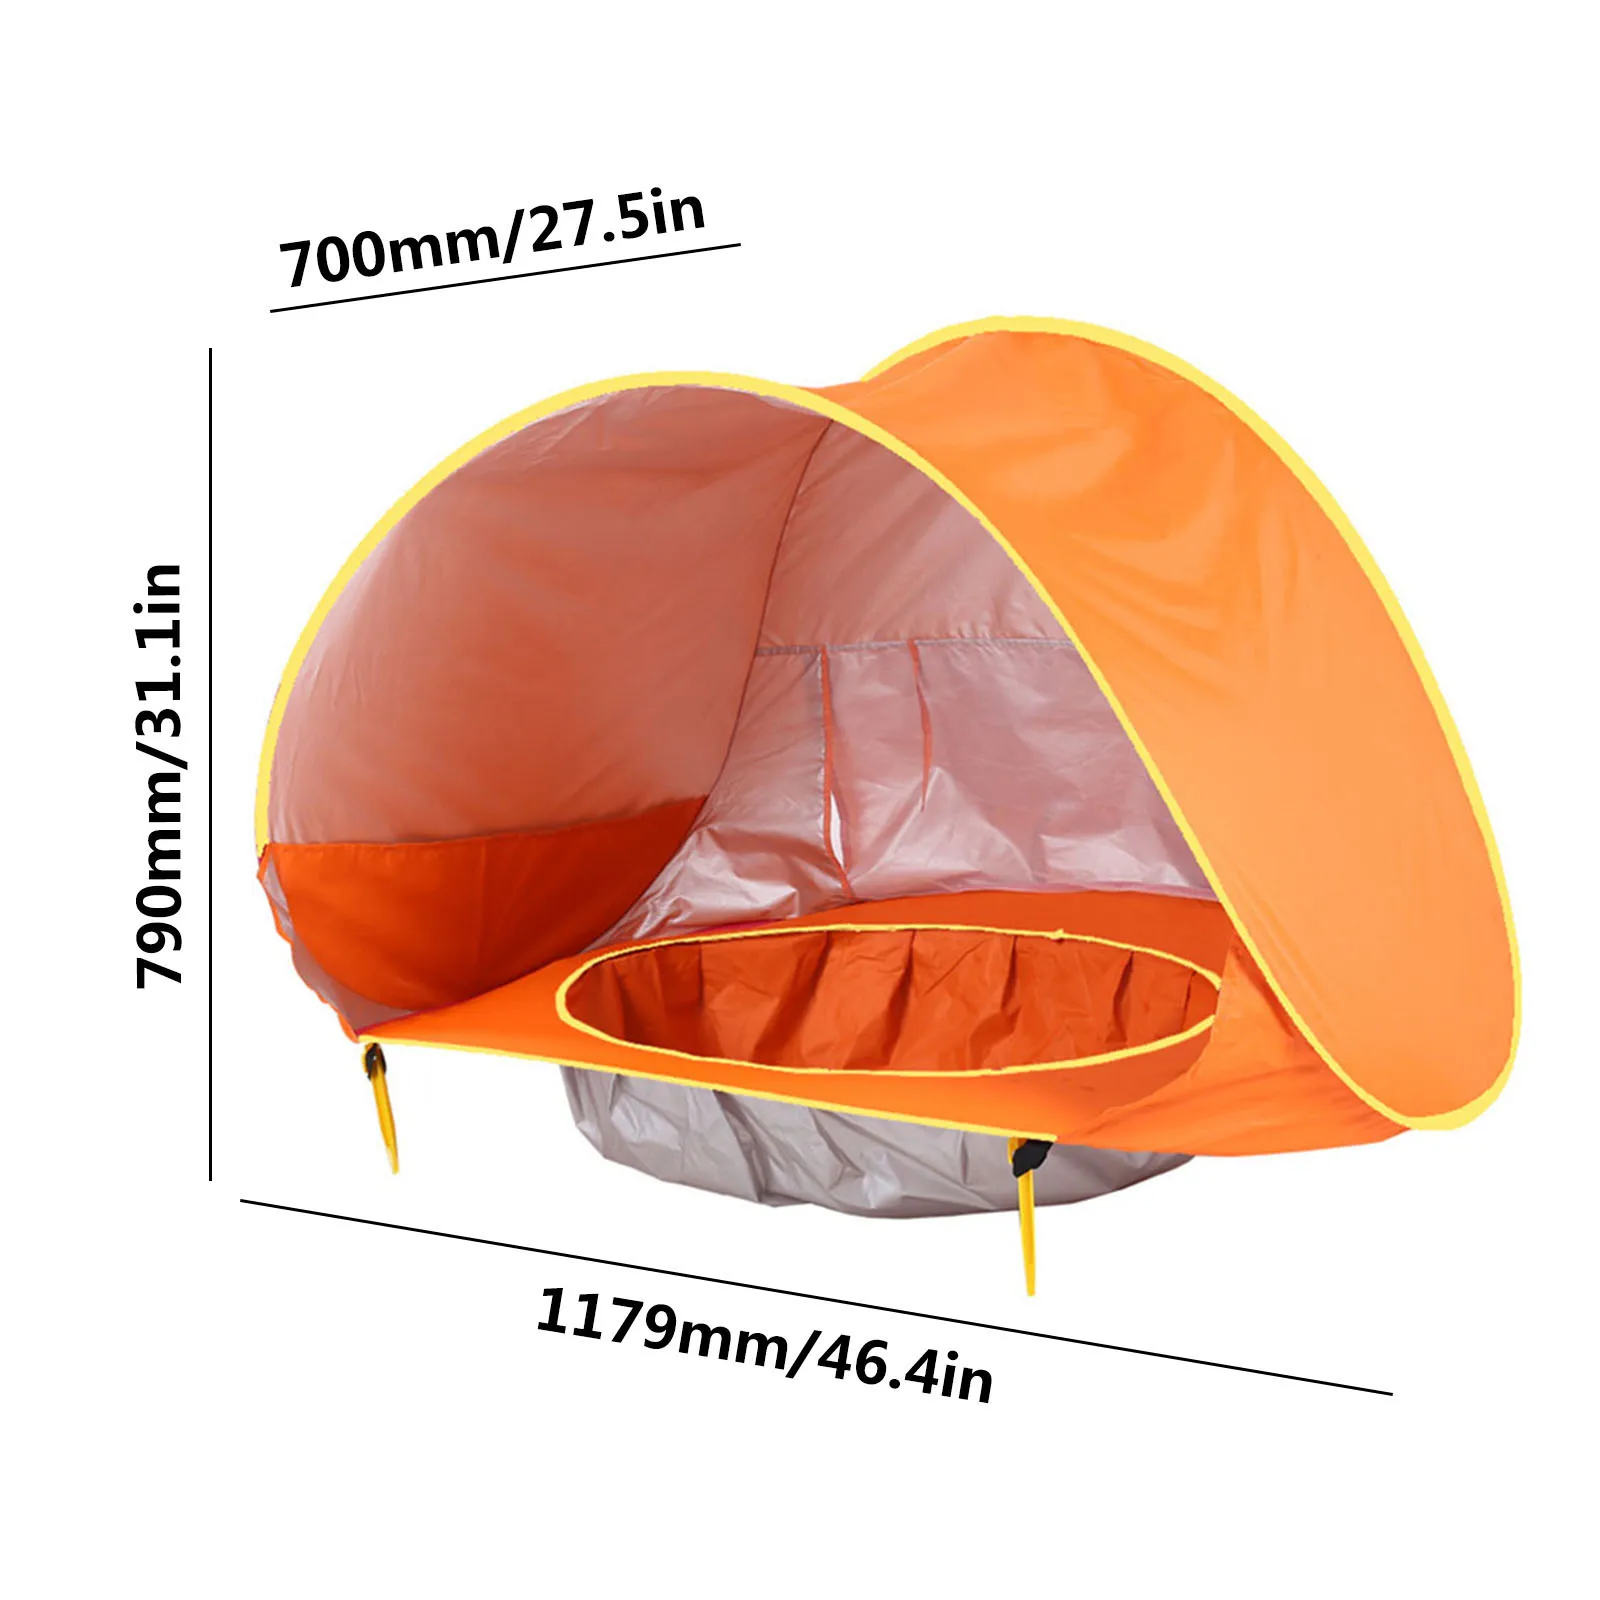 

Baby Beach Tent Portable Summer Pop Up Waterproof Sun Shelter Shade Sunscreen Pool Tent for Toddler Infant Ages 3-36 Months